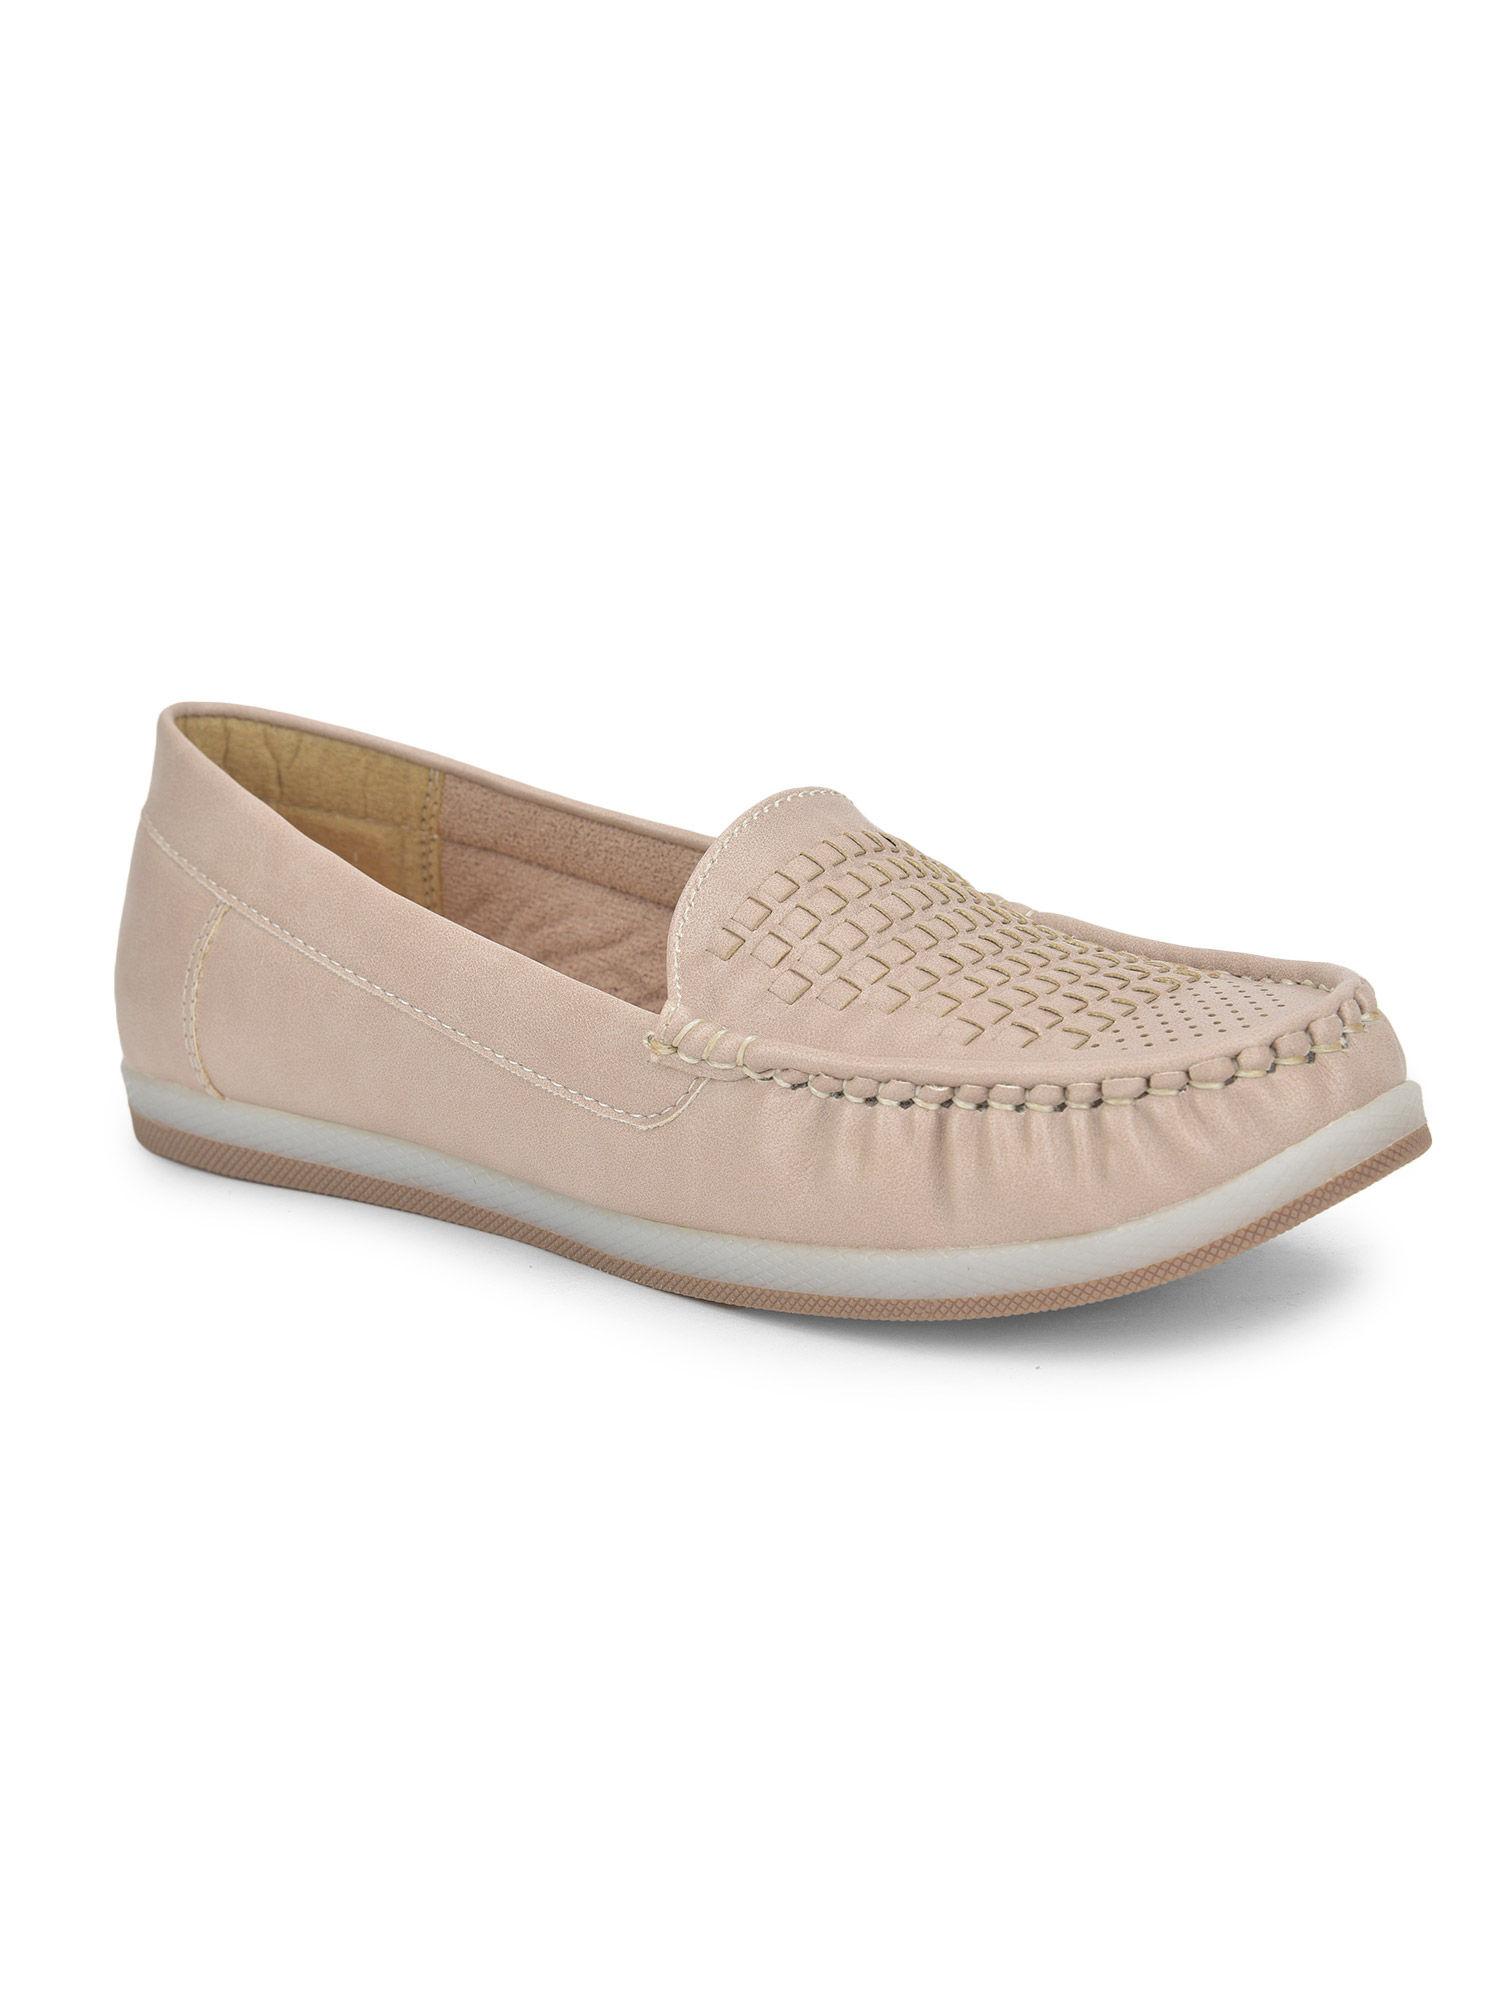 women cream solid loafers